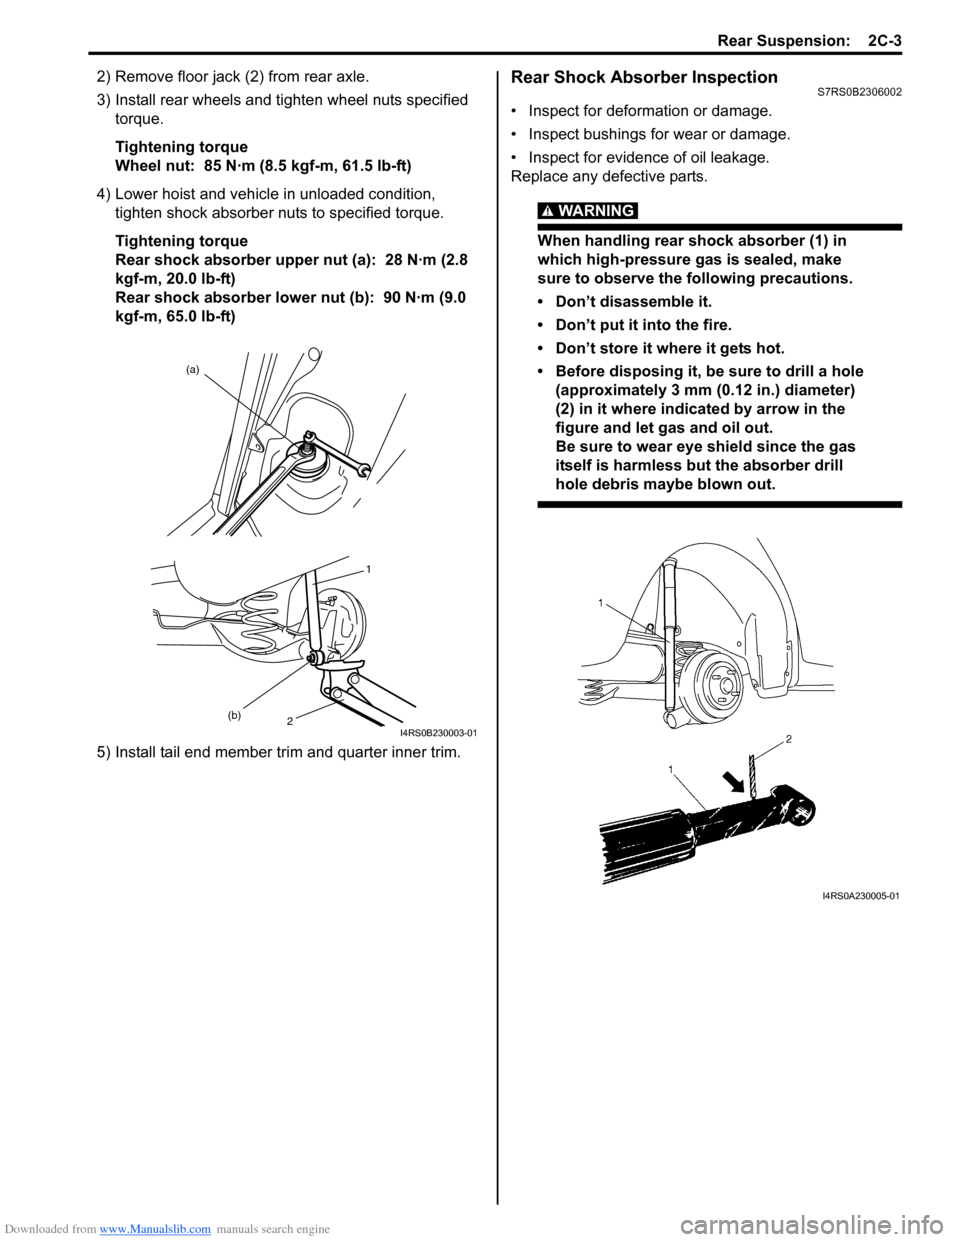 SUZUKI SWIFT 2006 2.G Service Workshop Manual Downloaded from www.Manualslib.com manuals search engine Rear Suspension:  2C-3
2) Remove floor jack (2) from rear axle.
3) Install rear wheels and tighten wheel nuts specified torque.
Tightening torq